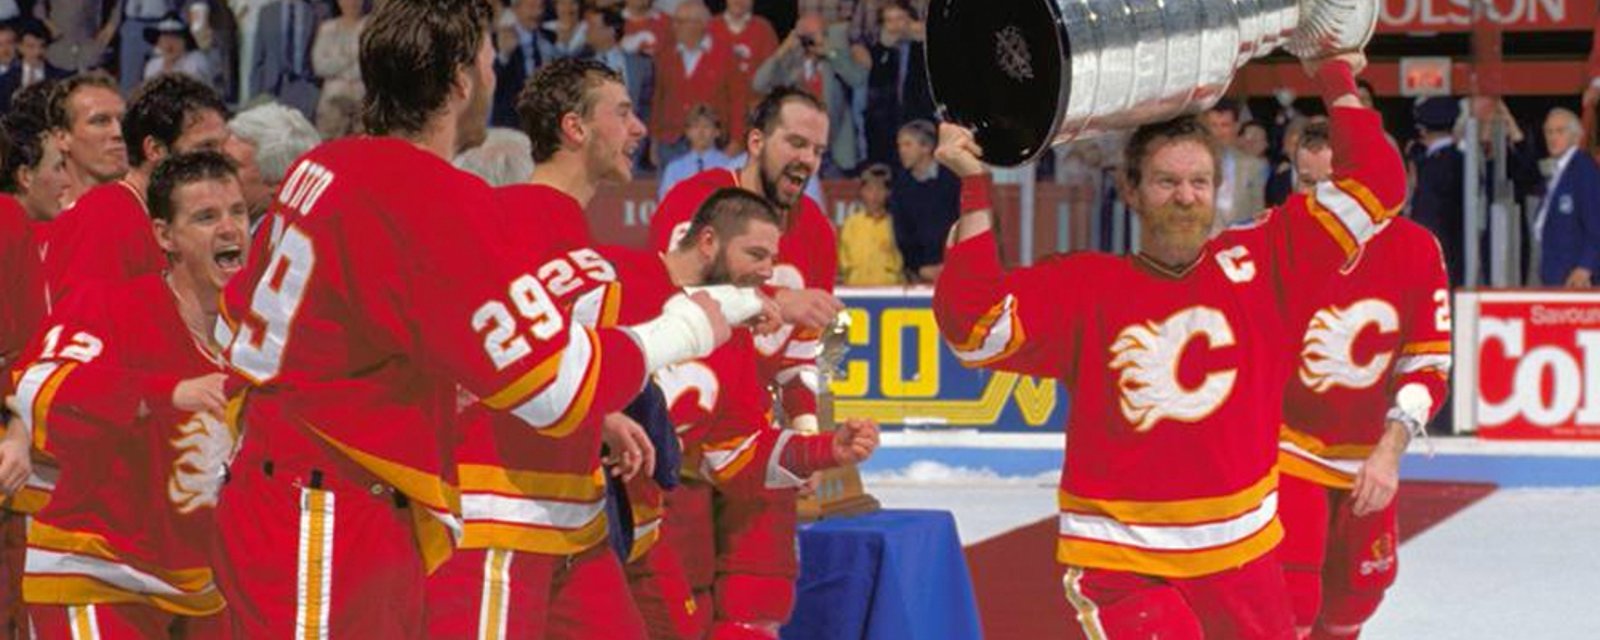 Flames reportedly going retro in 2020-21